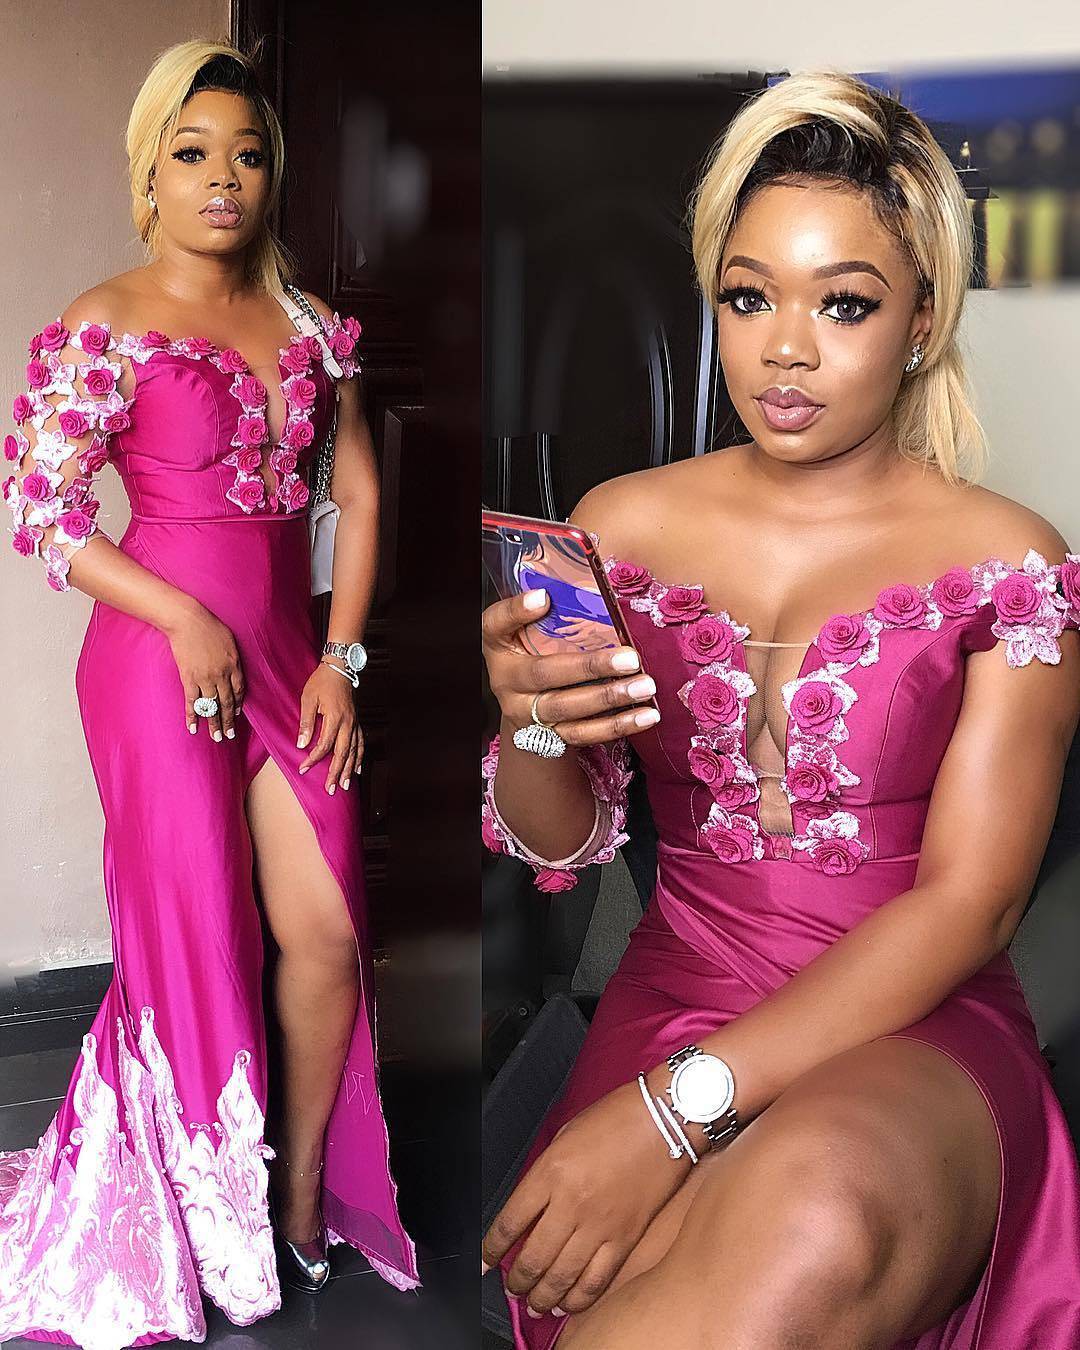 The Elegant And Stunning Aso Ebi Styles Form The Weekend